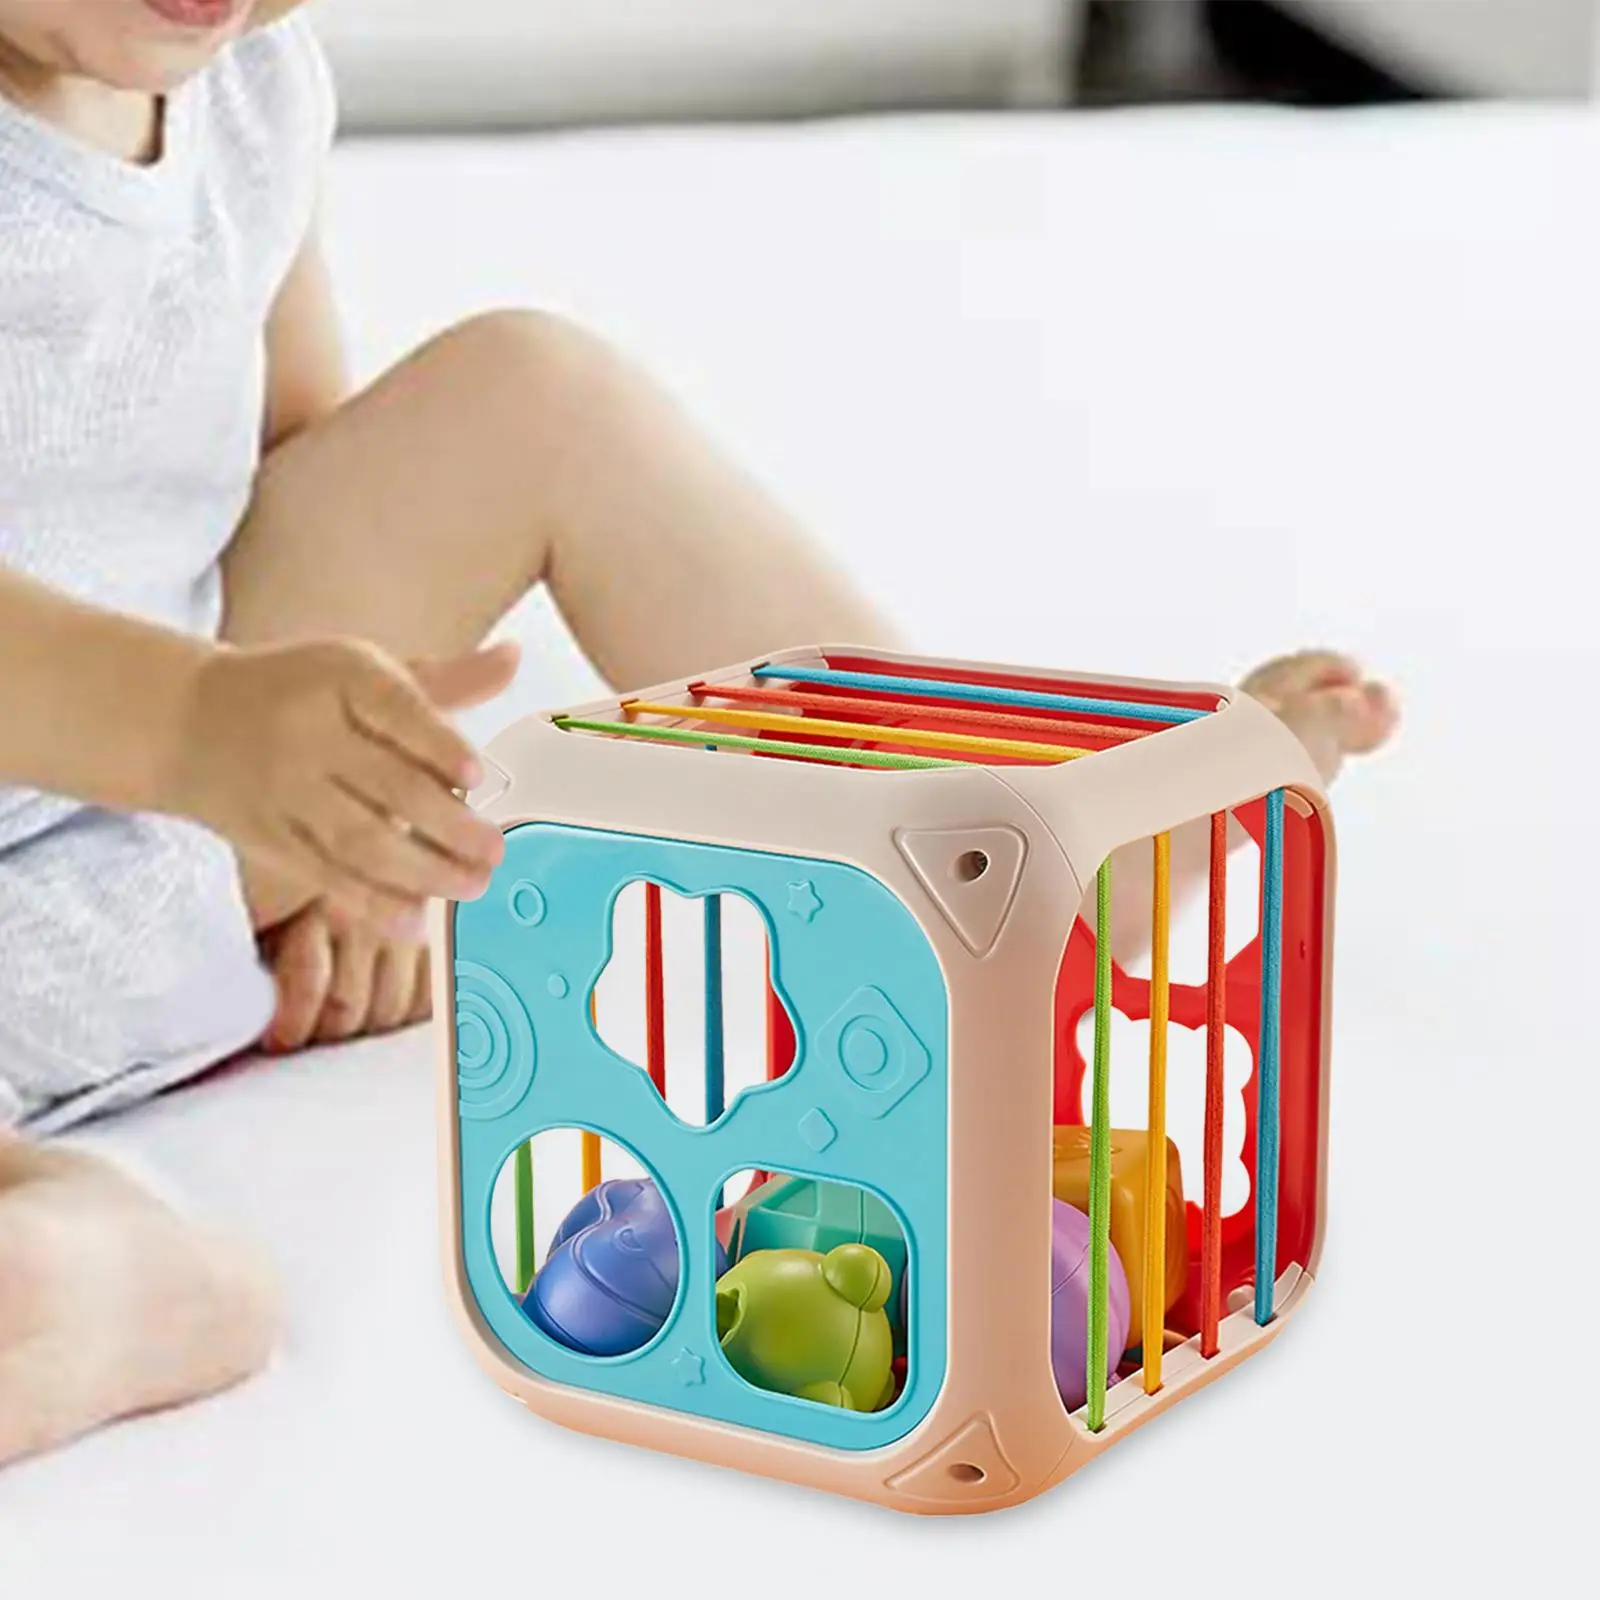 Montessori Baby Shape Sorter Toys Educational for 1 2 3 Year Old Babies Kids